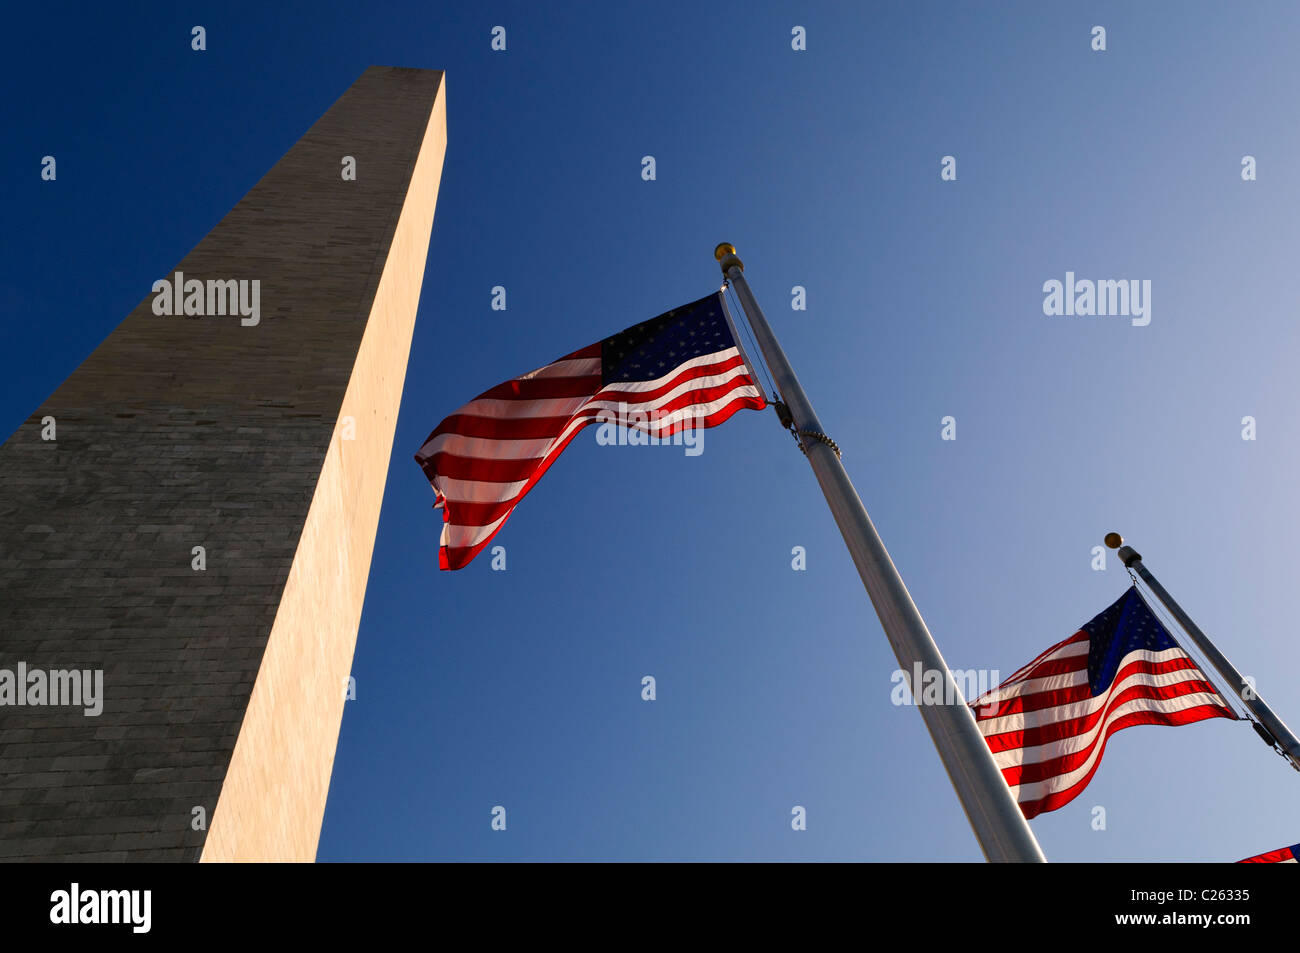 WASHINGTON DC, USA - The Washington Monument and American flags against a clear blue sky in early spring in Washington Dc Stock Photo